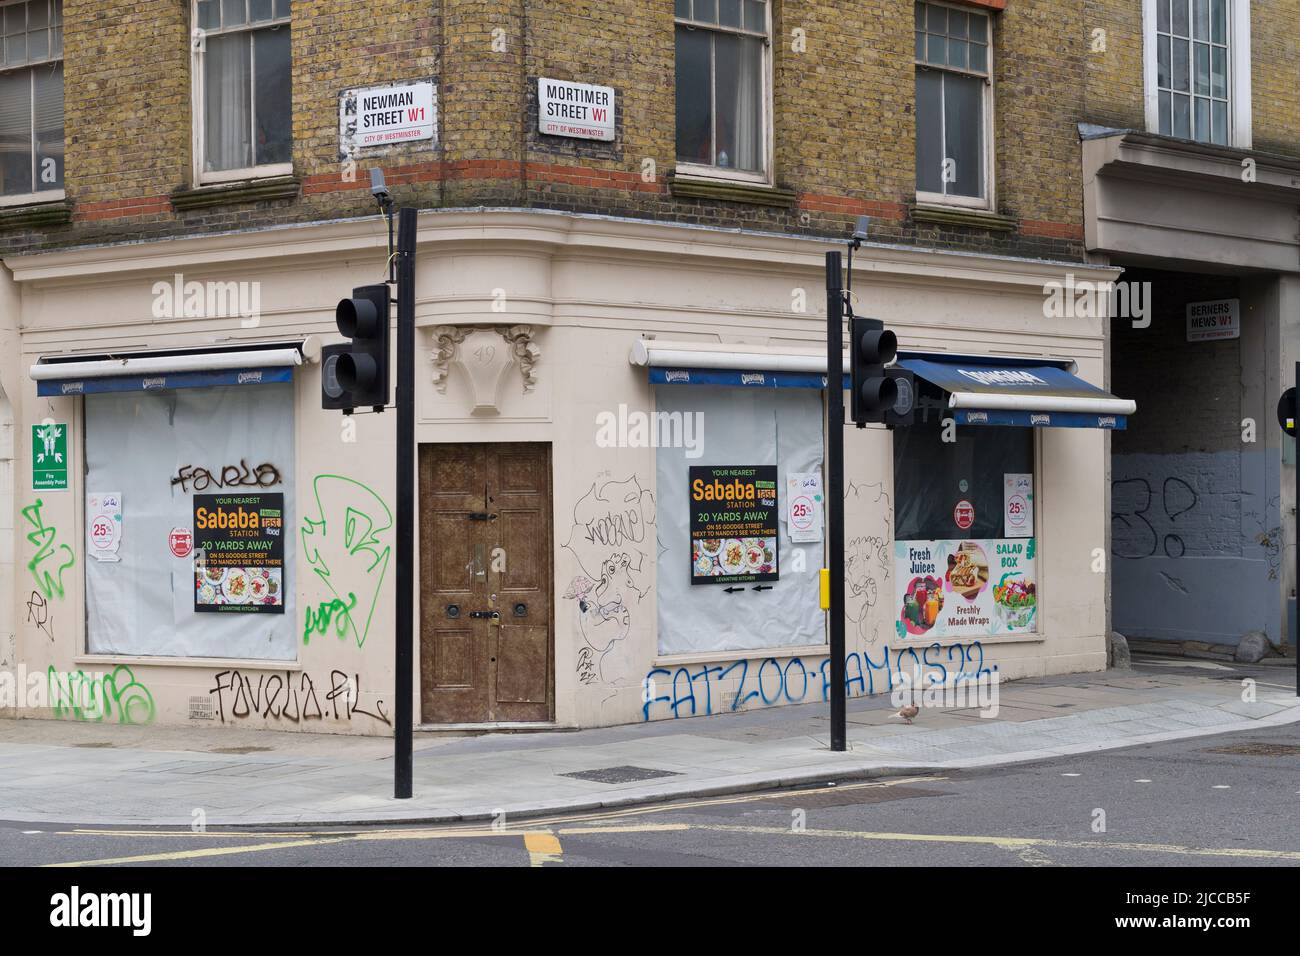 Pedestrians outside closed down and boarded up sandwich shop, Mortimer Street, City of Westminster, London, UK.  5 Jun 2022 Stock Photo